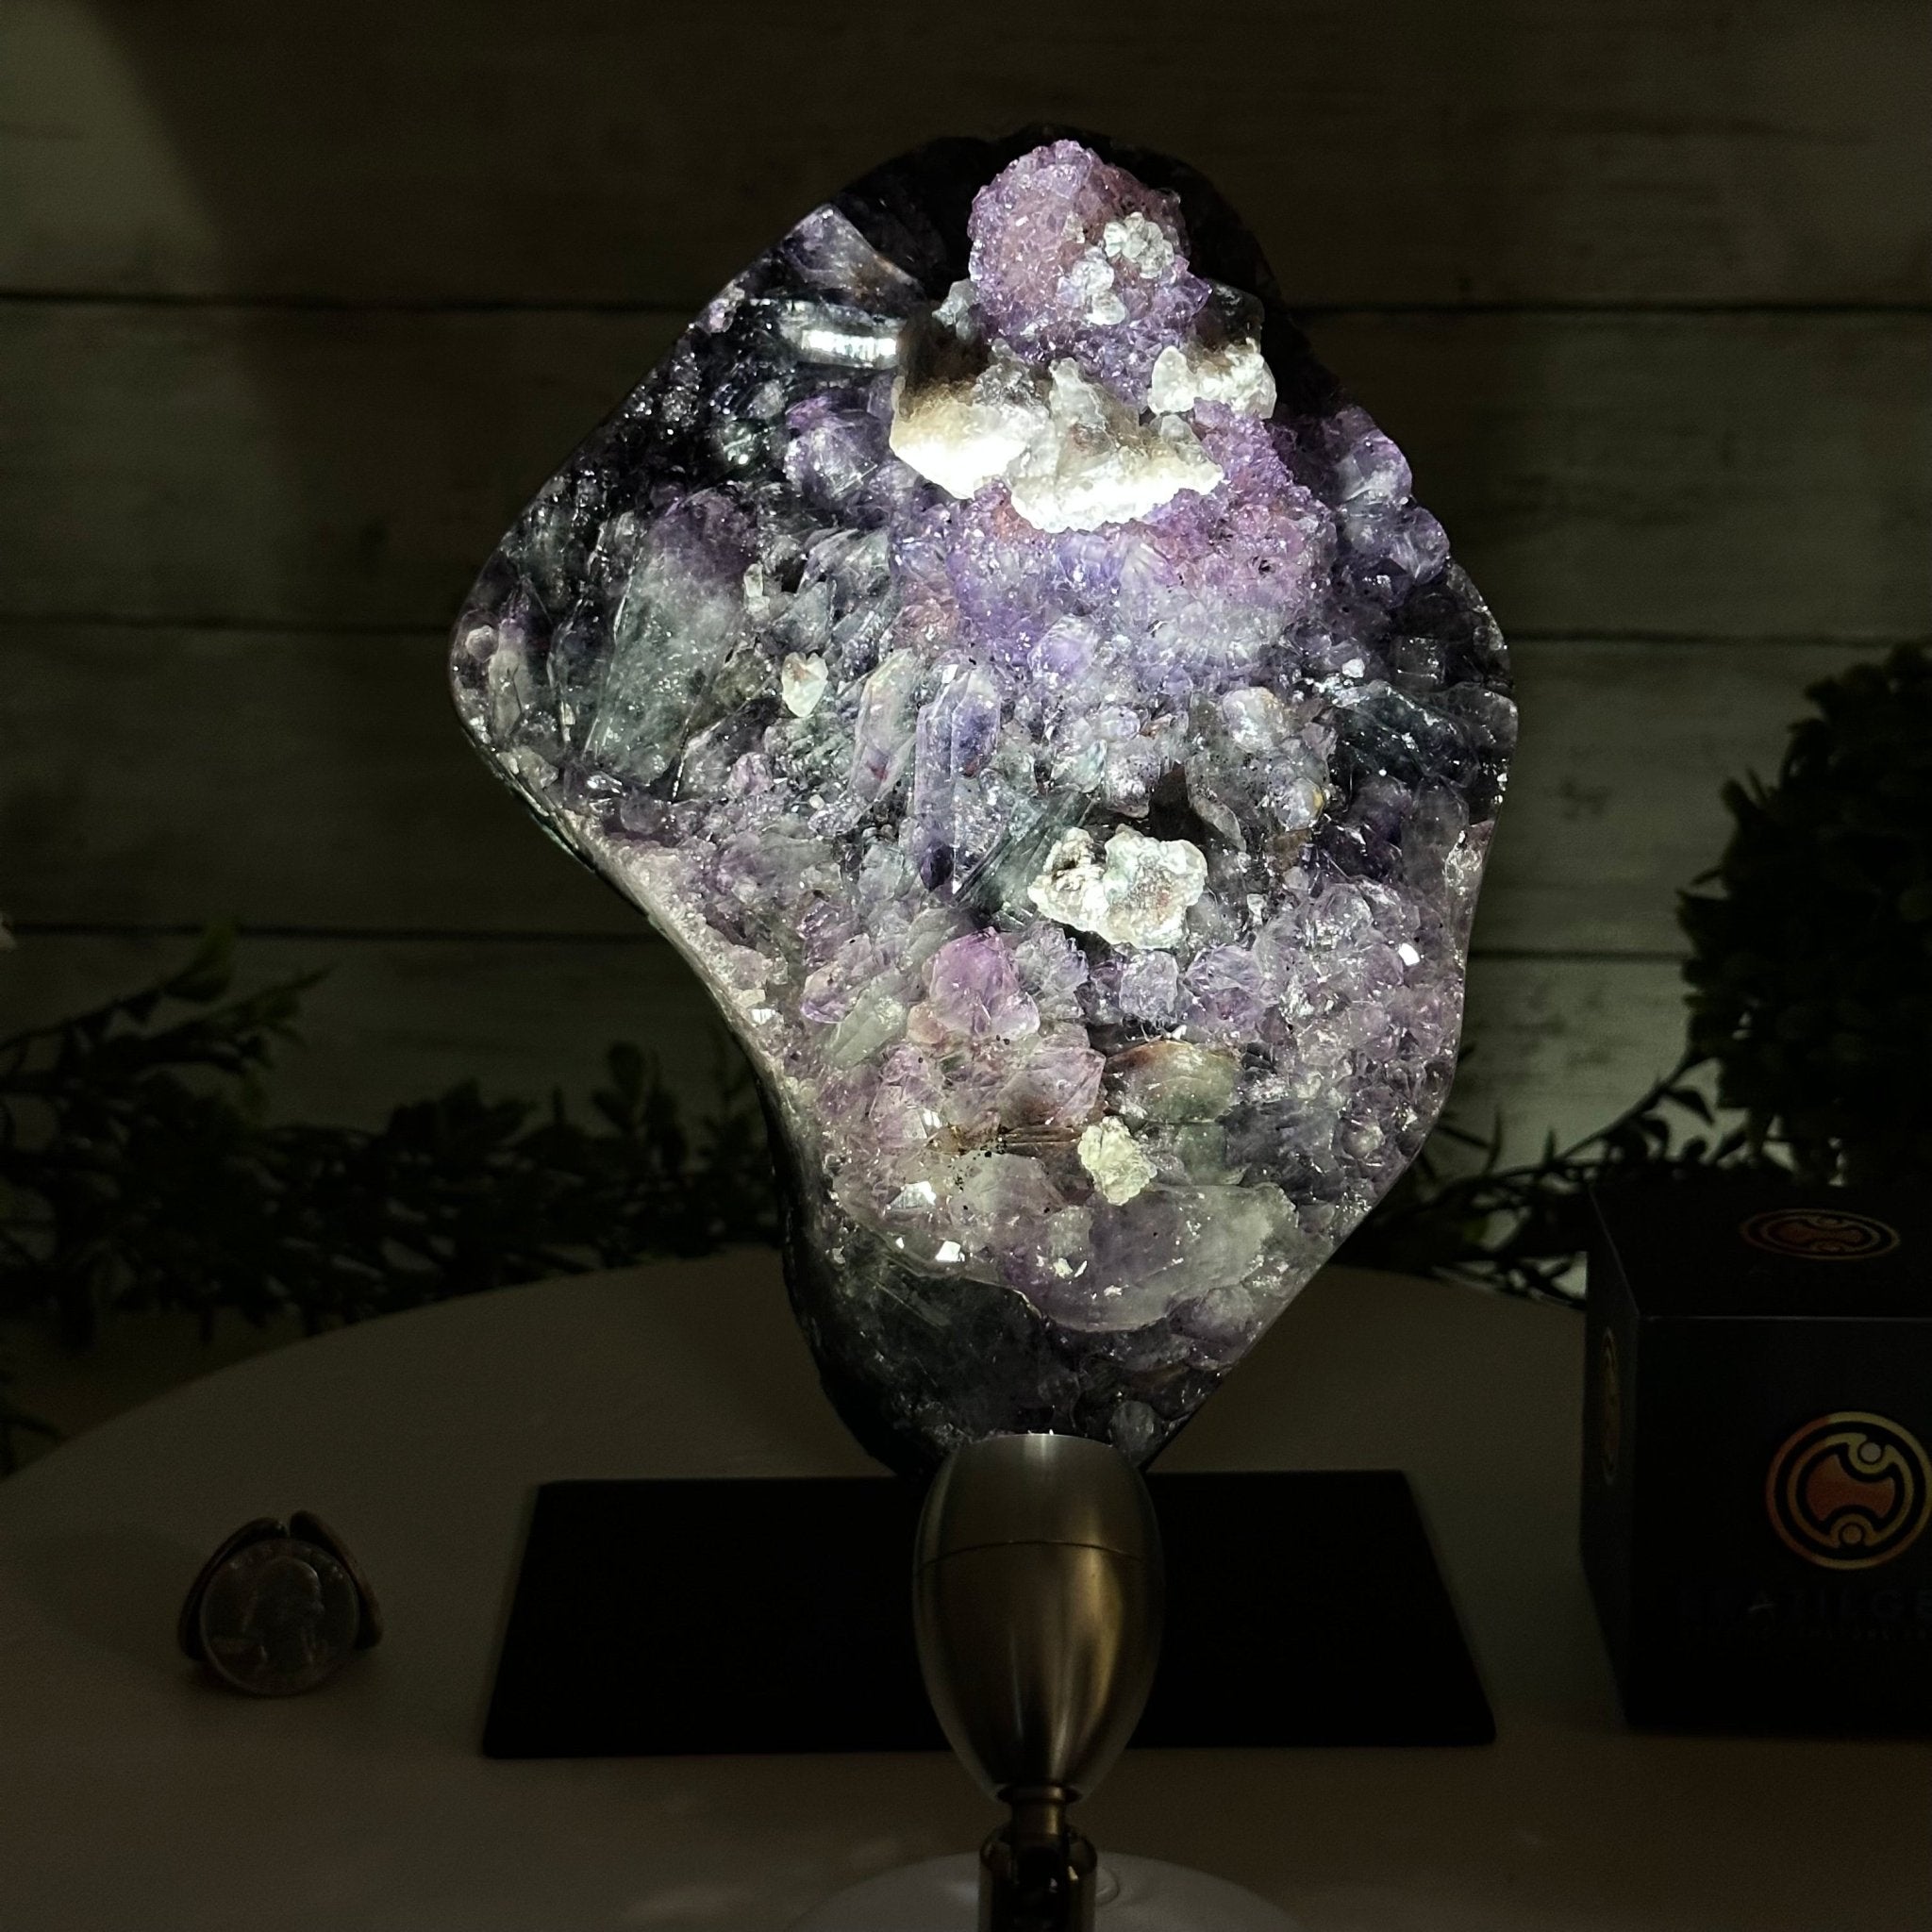 Extra Quality Amethyst Cluster on a Metal Base, 10.5 lbs & 8.8" Tall #5491-0142 - Brazil GemsBrazil GemsExtra Quality Amethyst Cluster on a Metal Base, 10.5 lbs & 8.8" Tall #5491-0142Clusters on Fixed Bases5491-0142